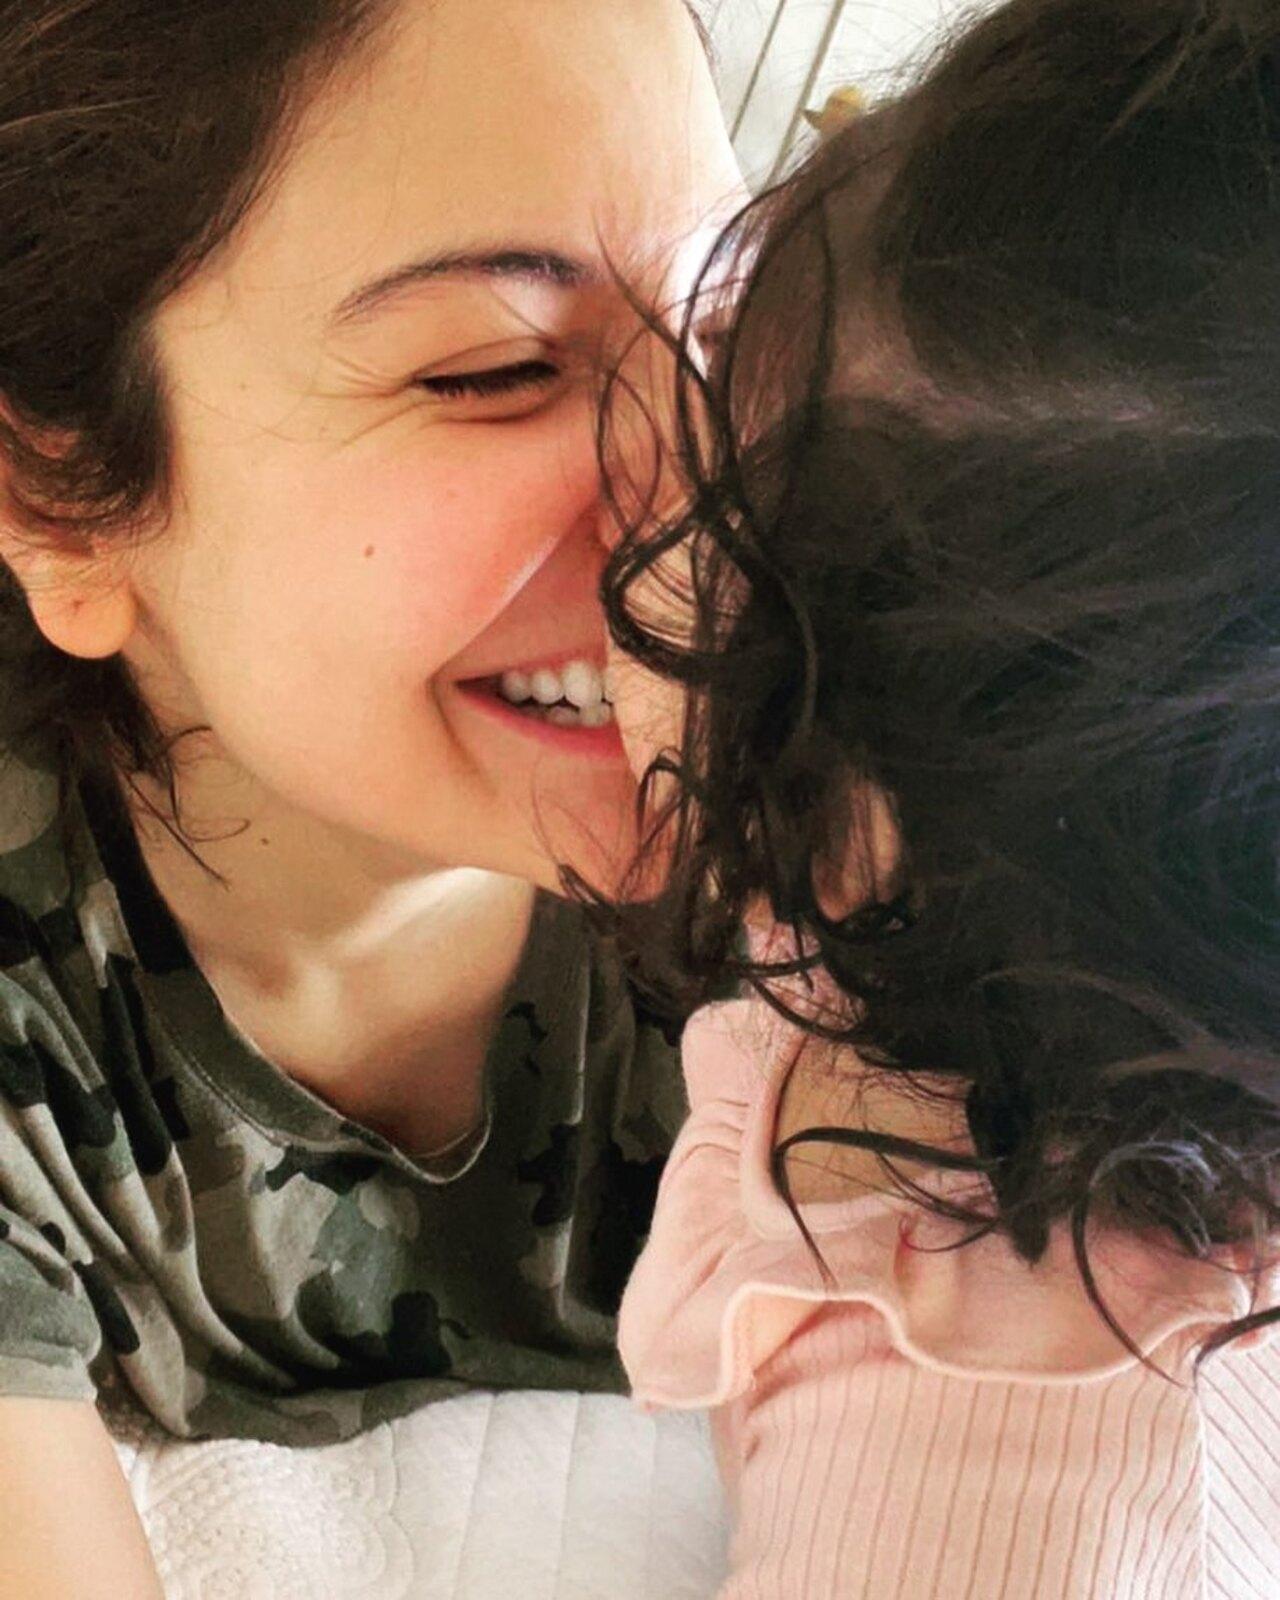 Vamika Kohli
Vamika Kohli is actress Anushka Sharma and cricketer Virat Kohli's daughter. The star couple hasn't released her pictures yet. She turned two this year. Announcing her name, Anushka and Virat wrote, 